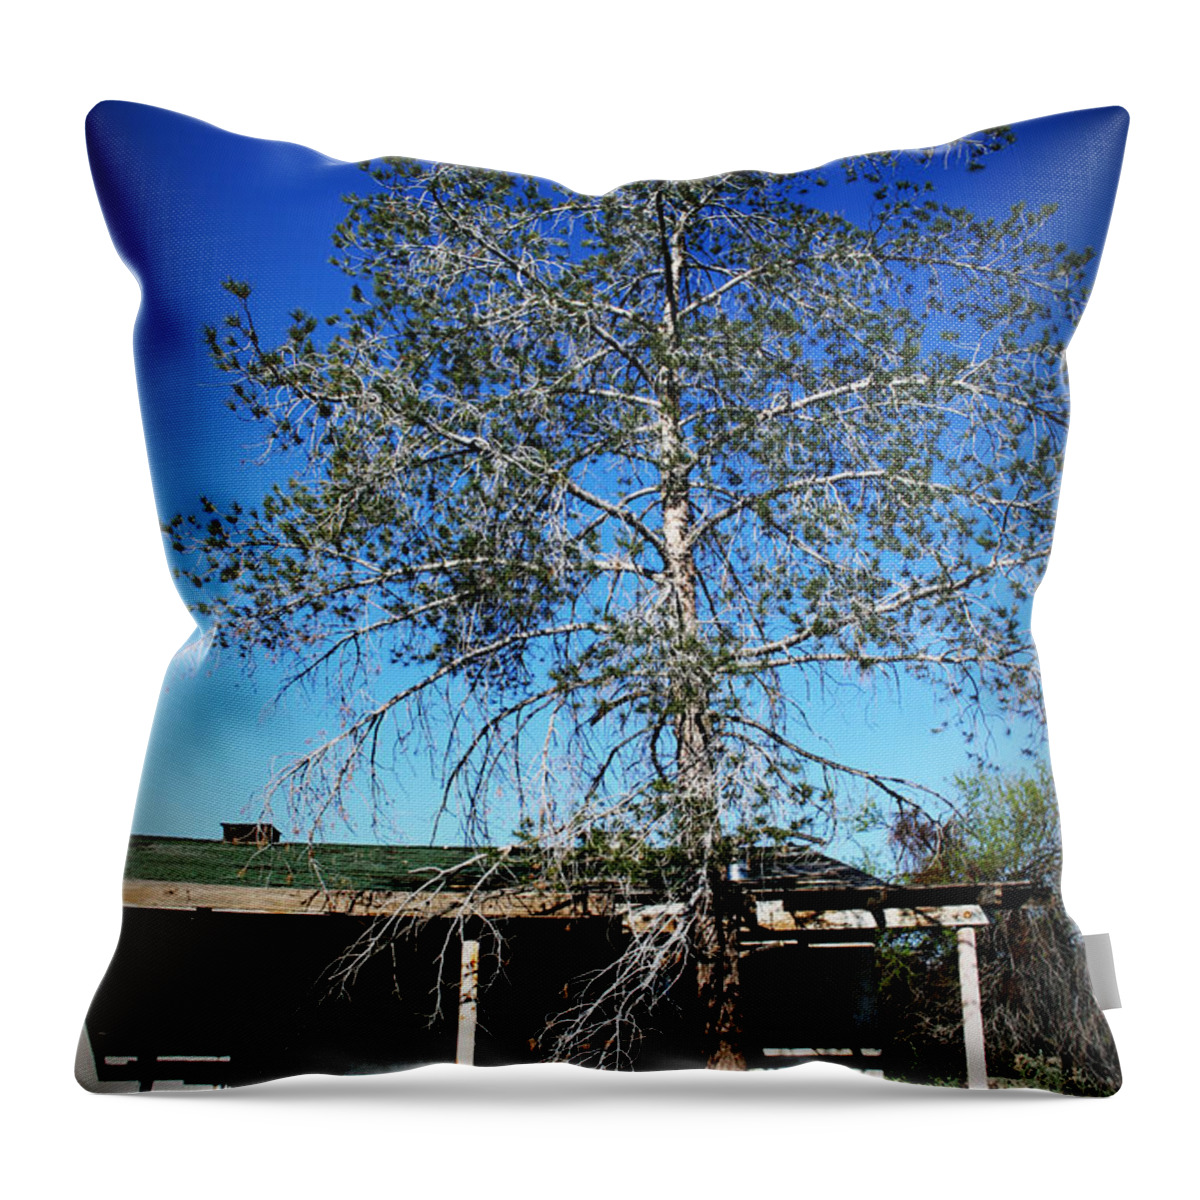 Old Throw Pillow featuring the photograph Abandonment by Charles Benavidez